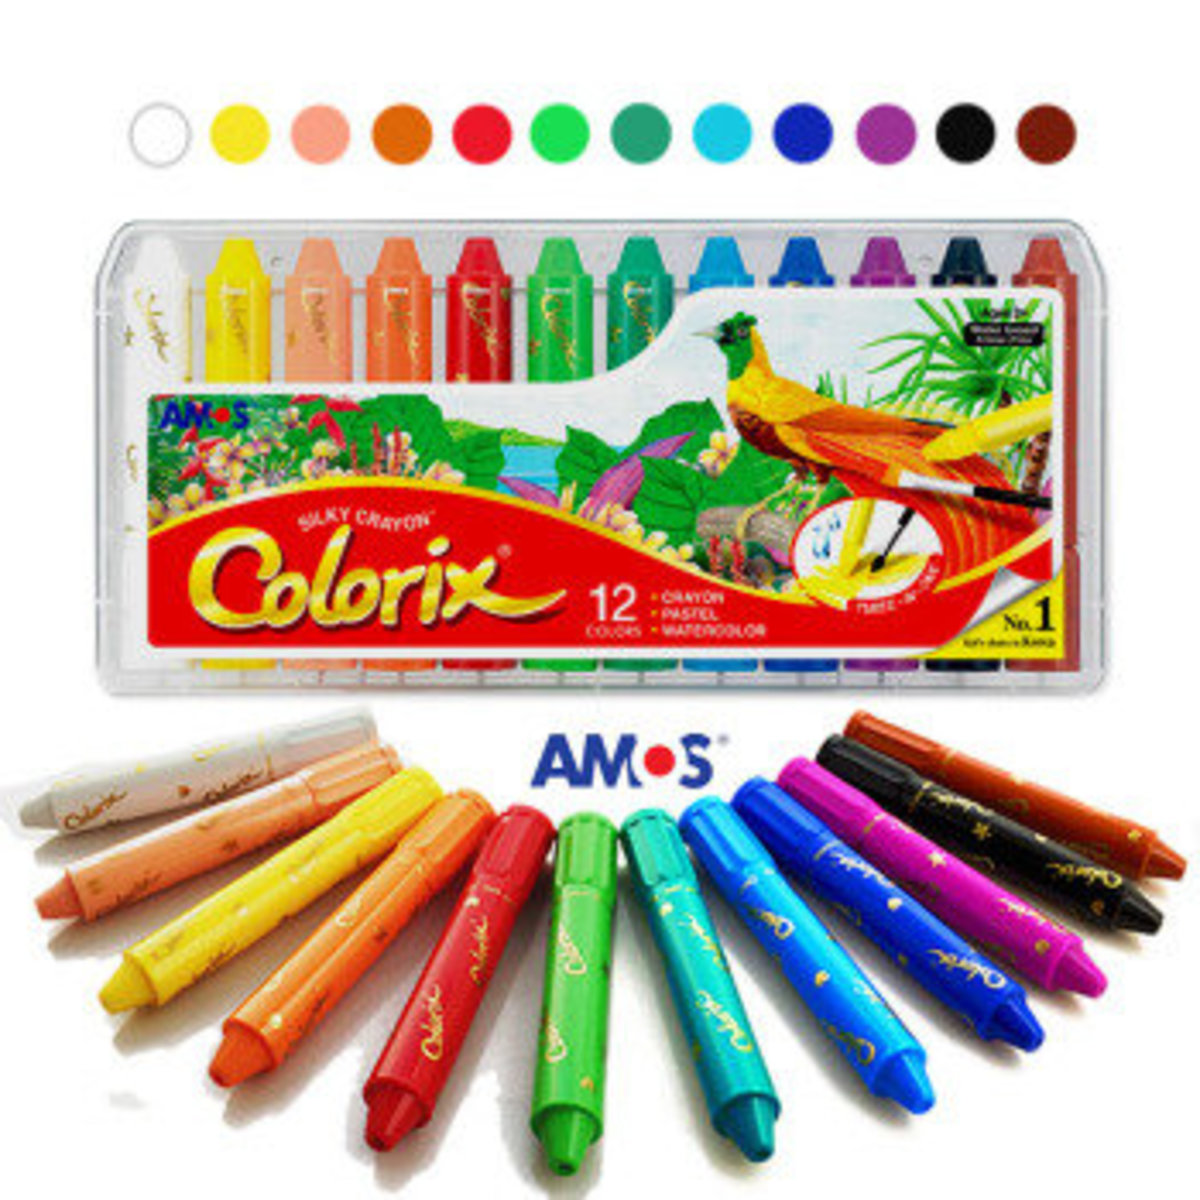 Amos Colorix Silky Crayons 12 Peaces (3 color types Watercolor, Crayons,  Oil Pastels combine in one Paint) - AliExpress